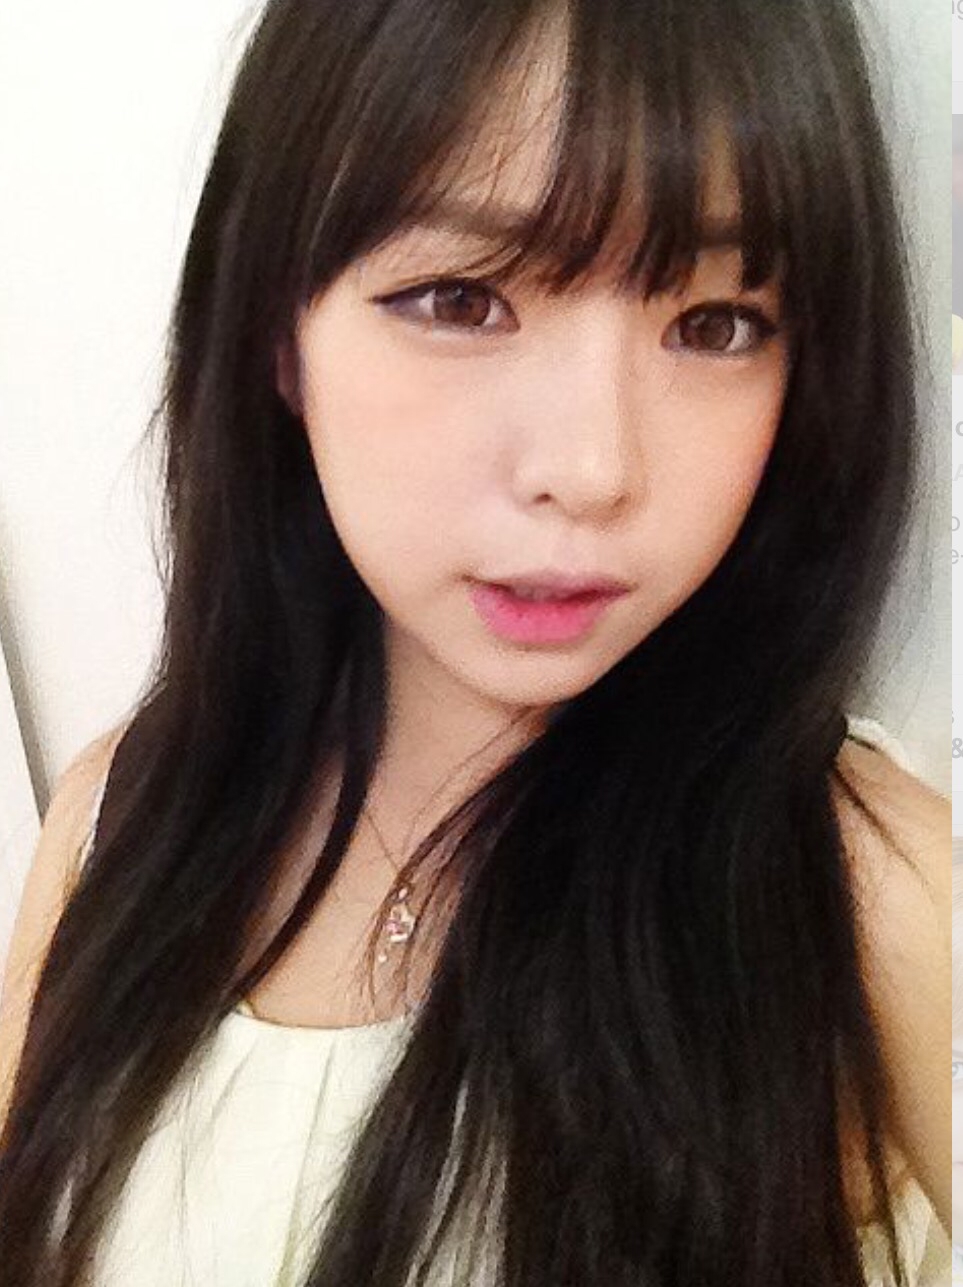 The Hairstyle To Try This Spring: Asian See Through Bangs♡ | Beauty pertaining to Asian Long Hairstyles With Bangs